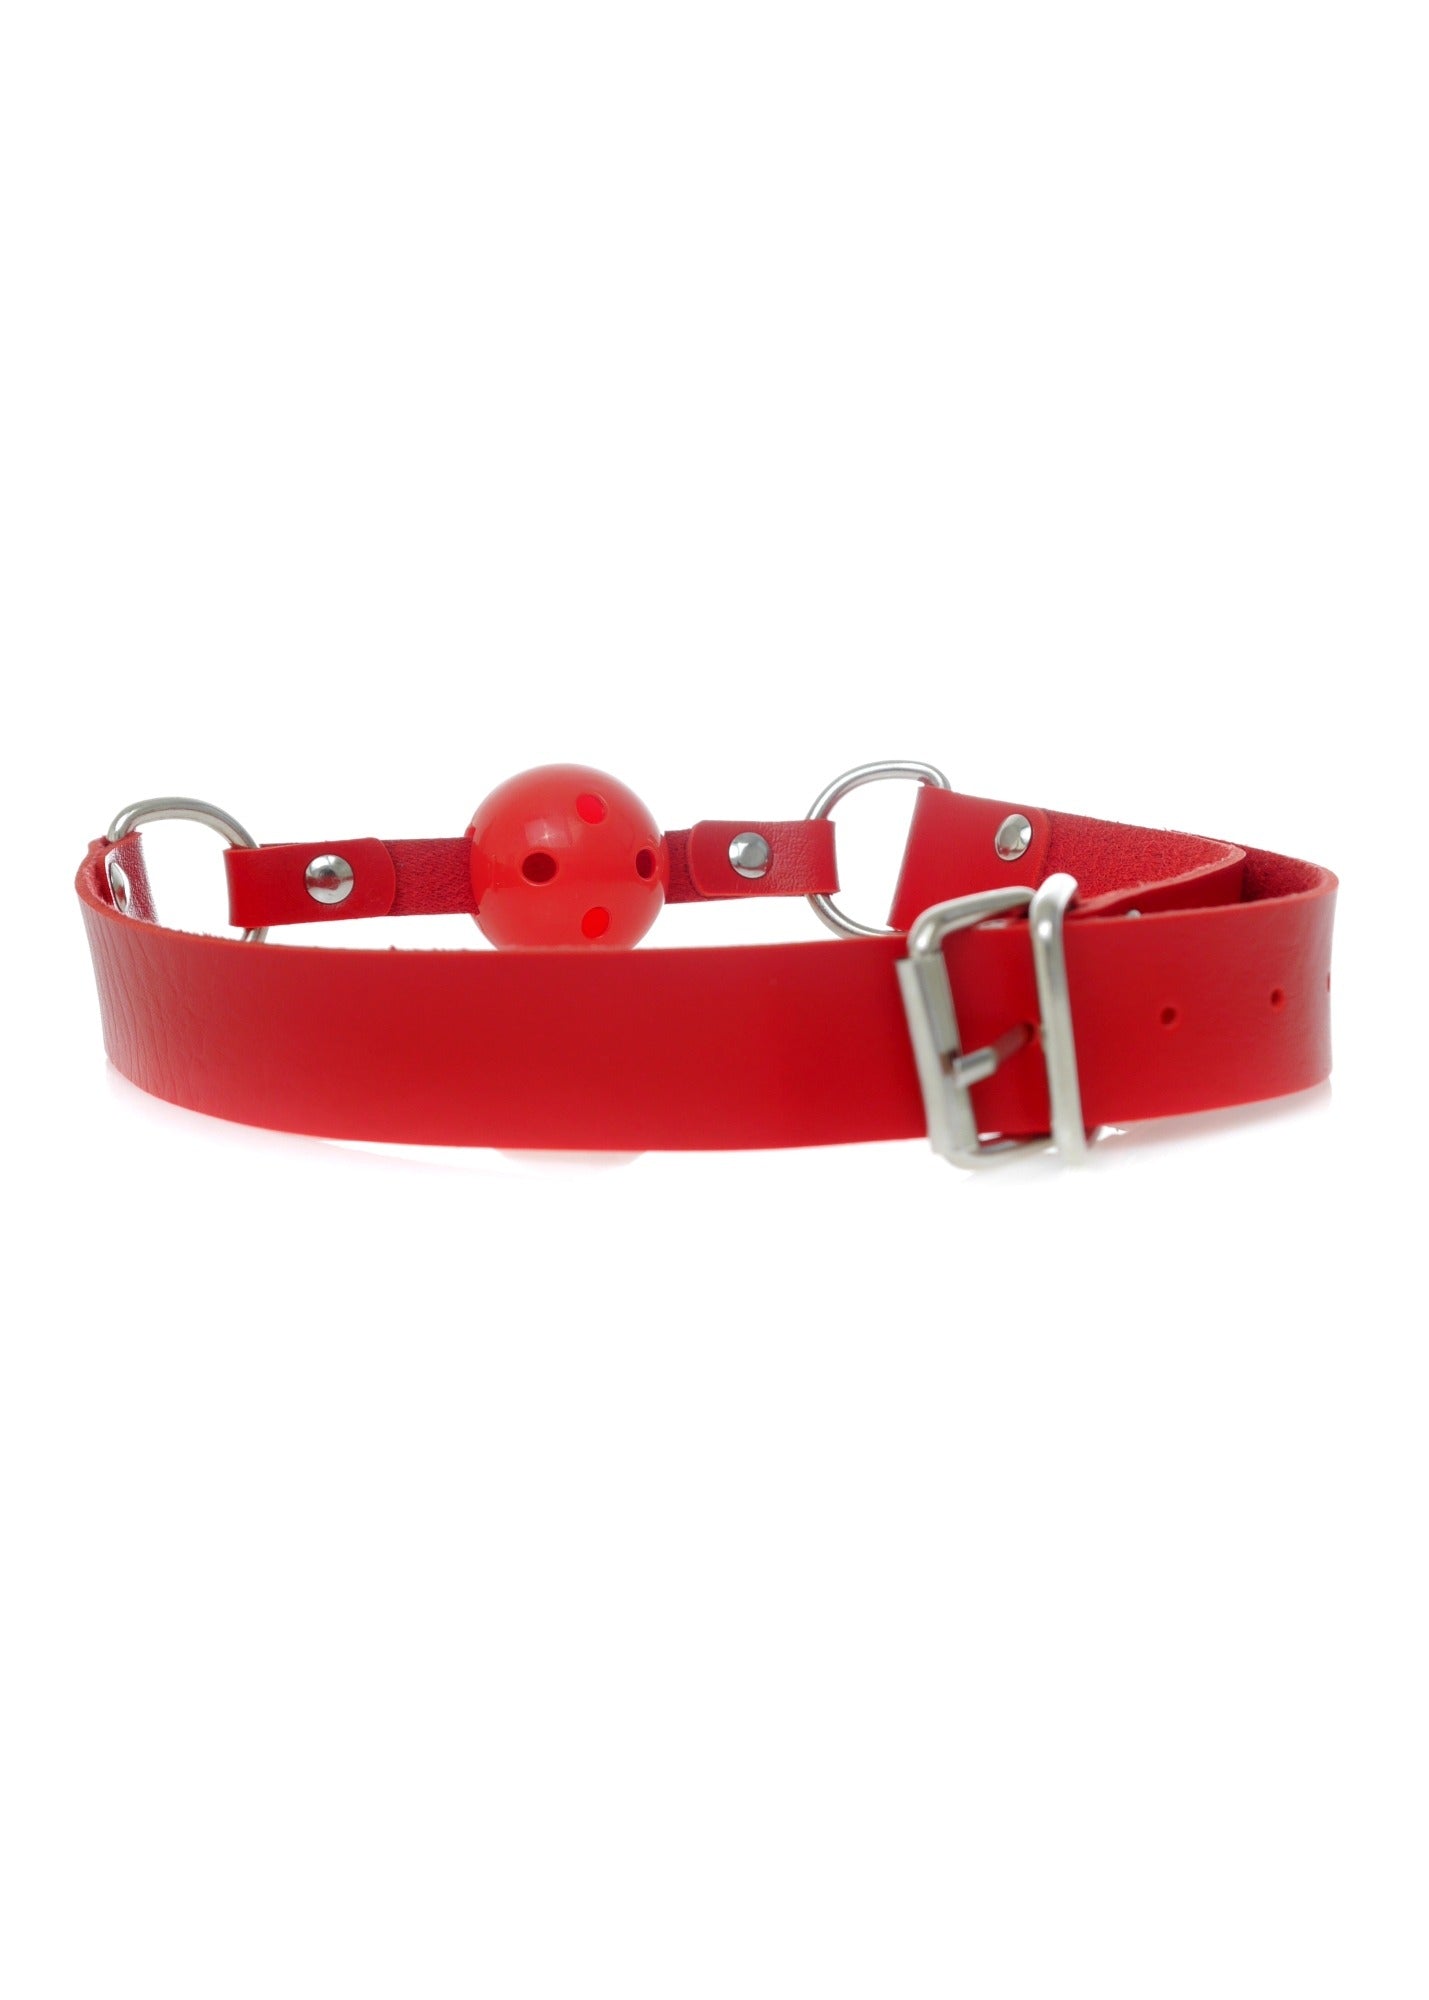 Bossoftoys - 61-00034 - Ball Gag - adjustable - breathable - attractive colour window box - Red